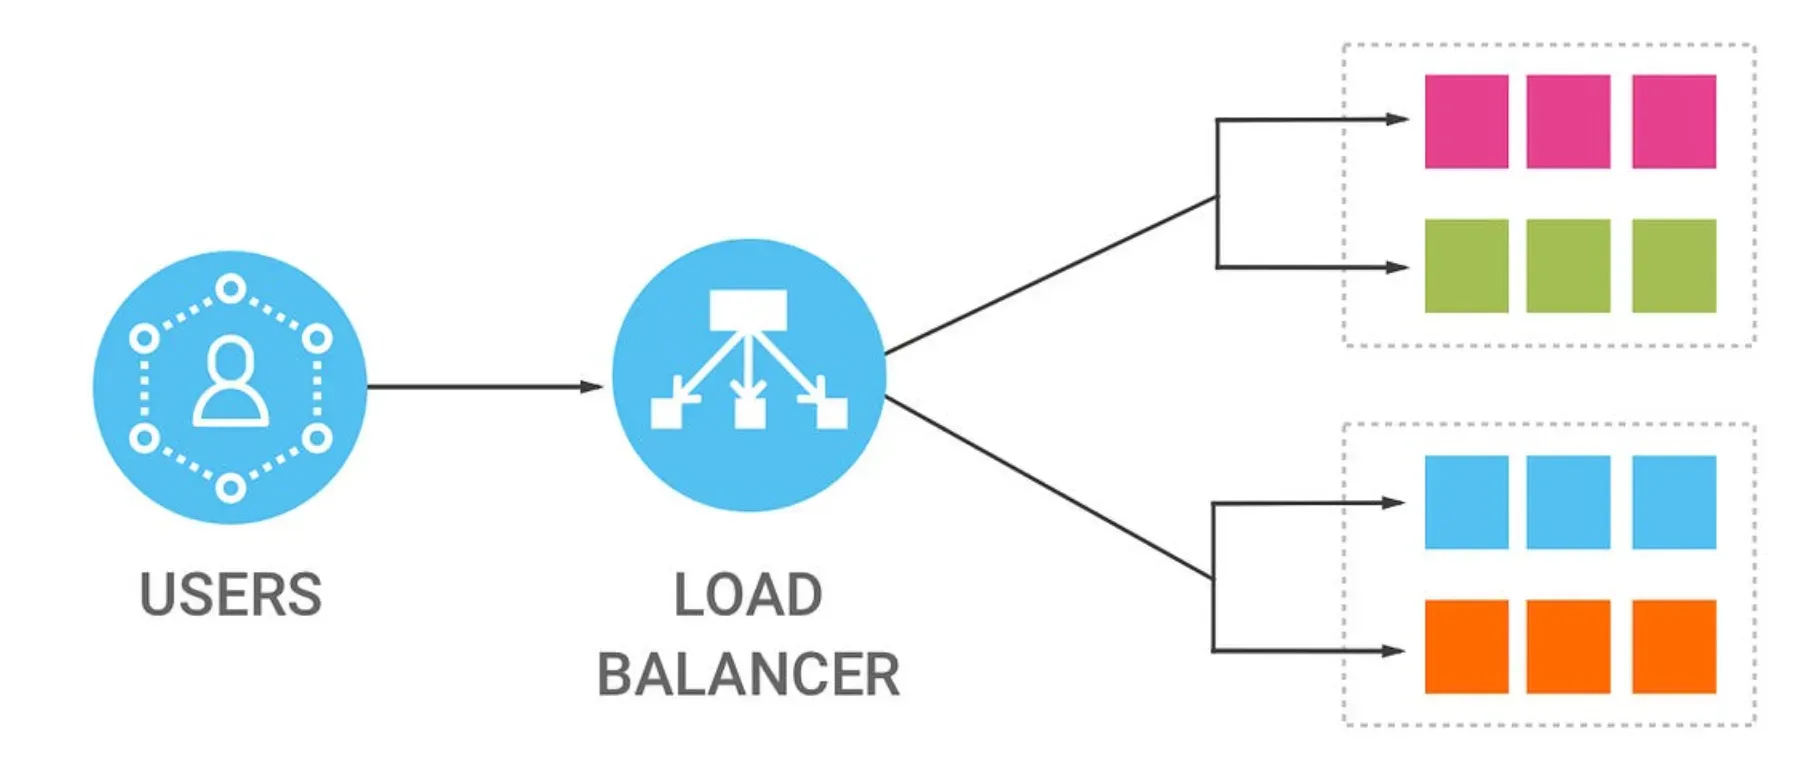 Benefits and Challenges of Load Balancing